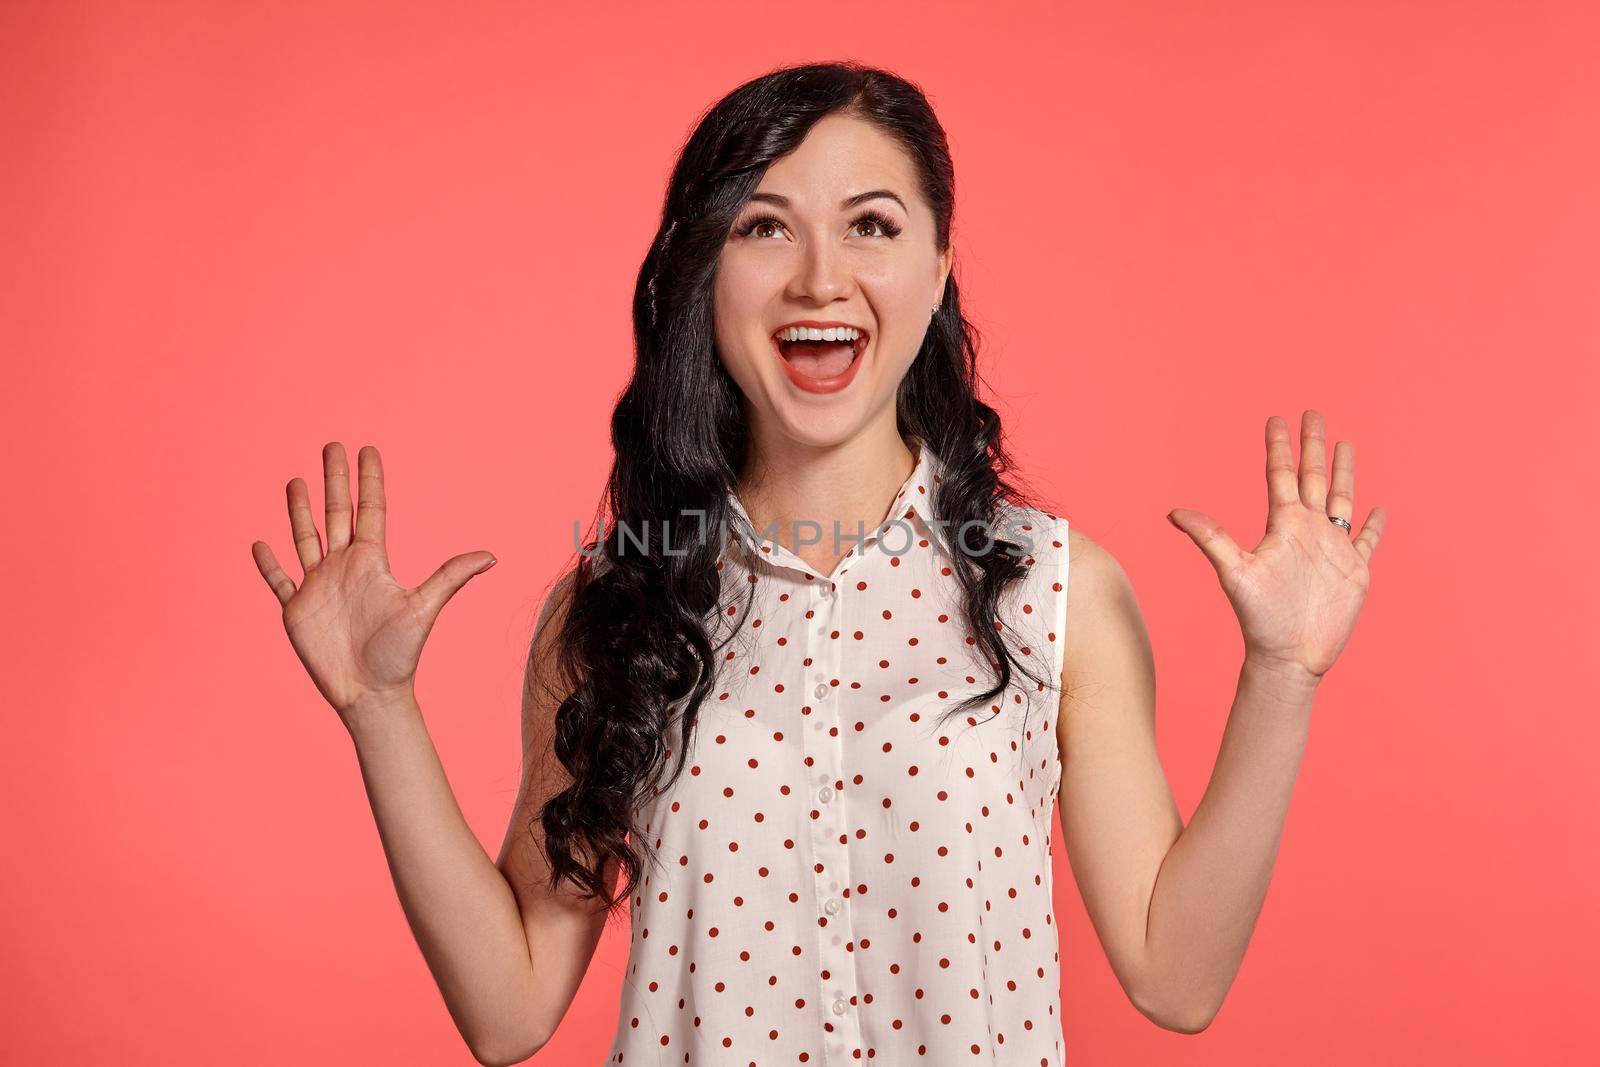 Studio shot of a gorgeous adolescent girl, wearing casual white polka dot blouse. Little brunette female is smiling widely and looking very happy posing over a pink background. People and sincere emotions.